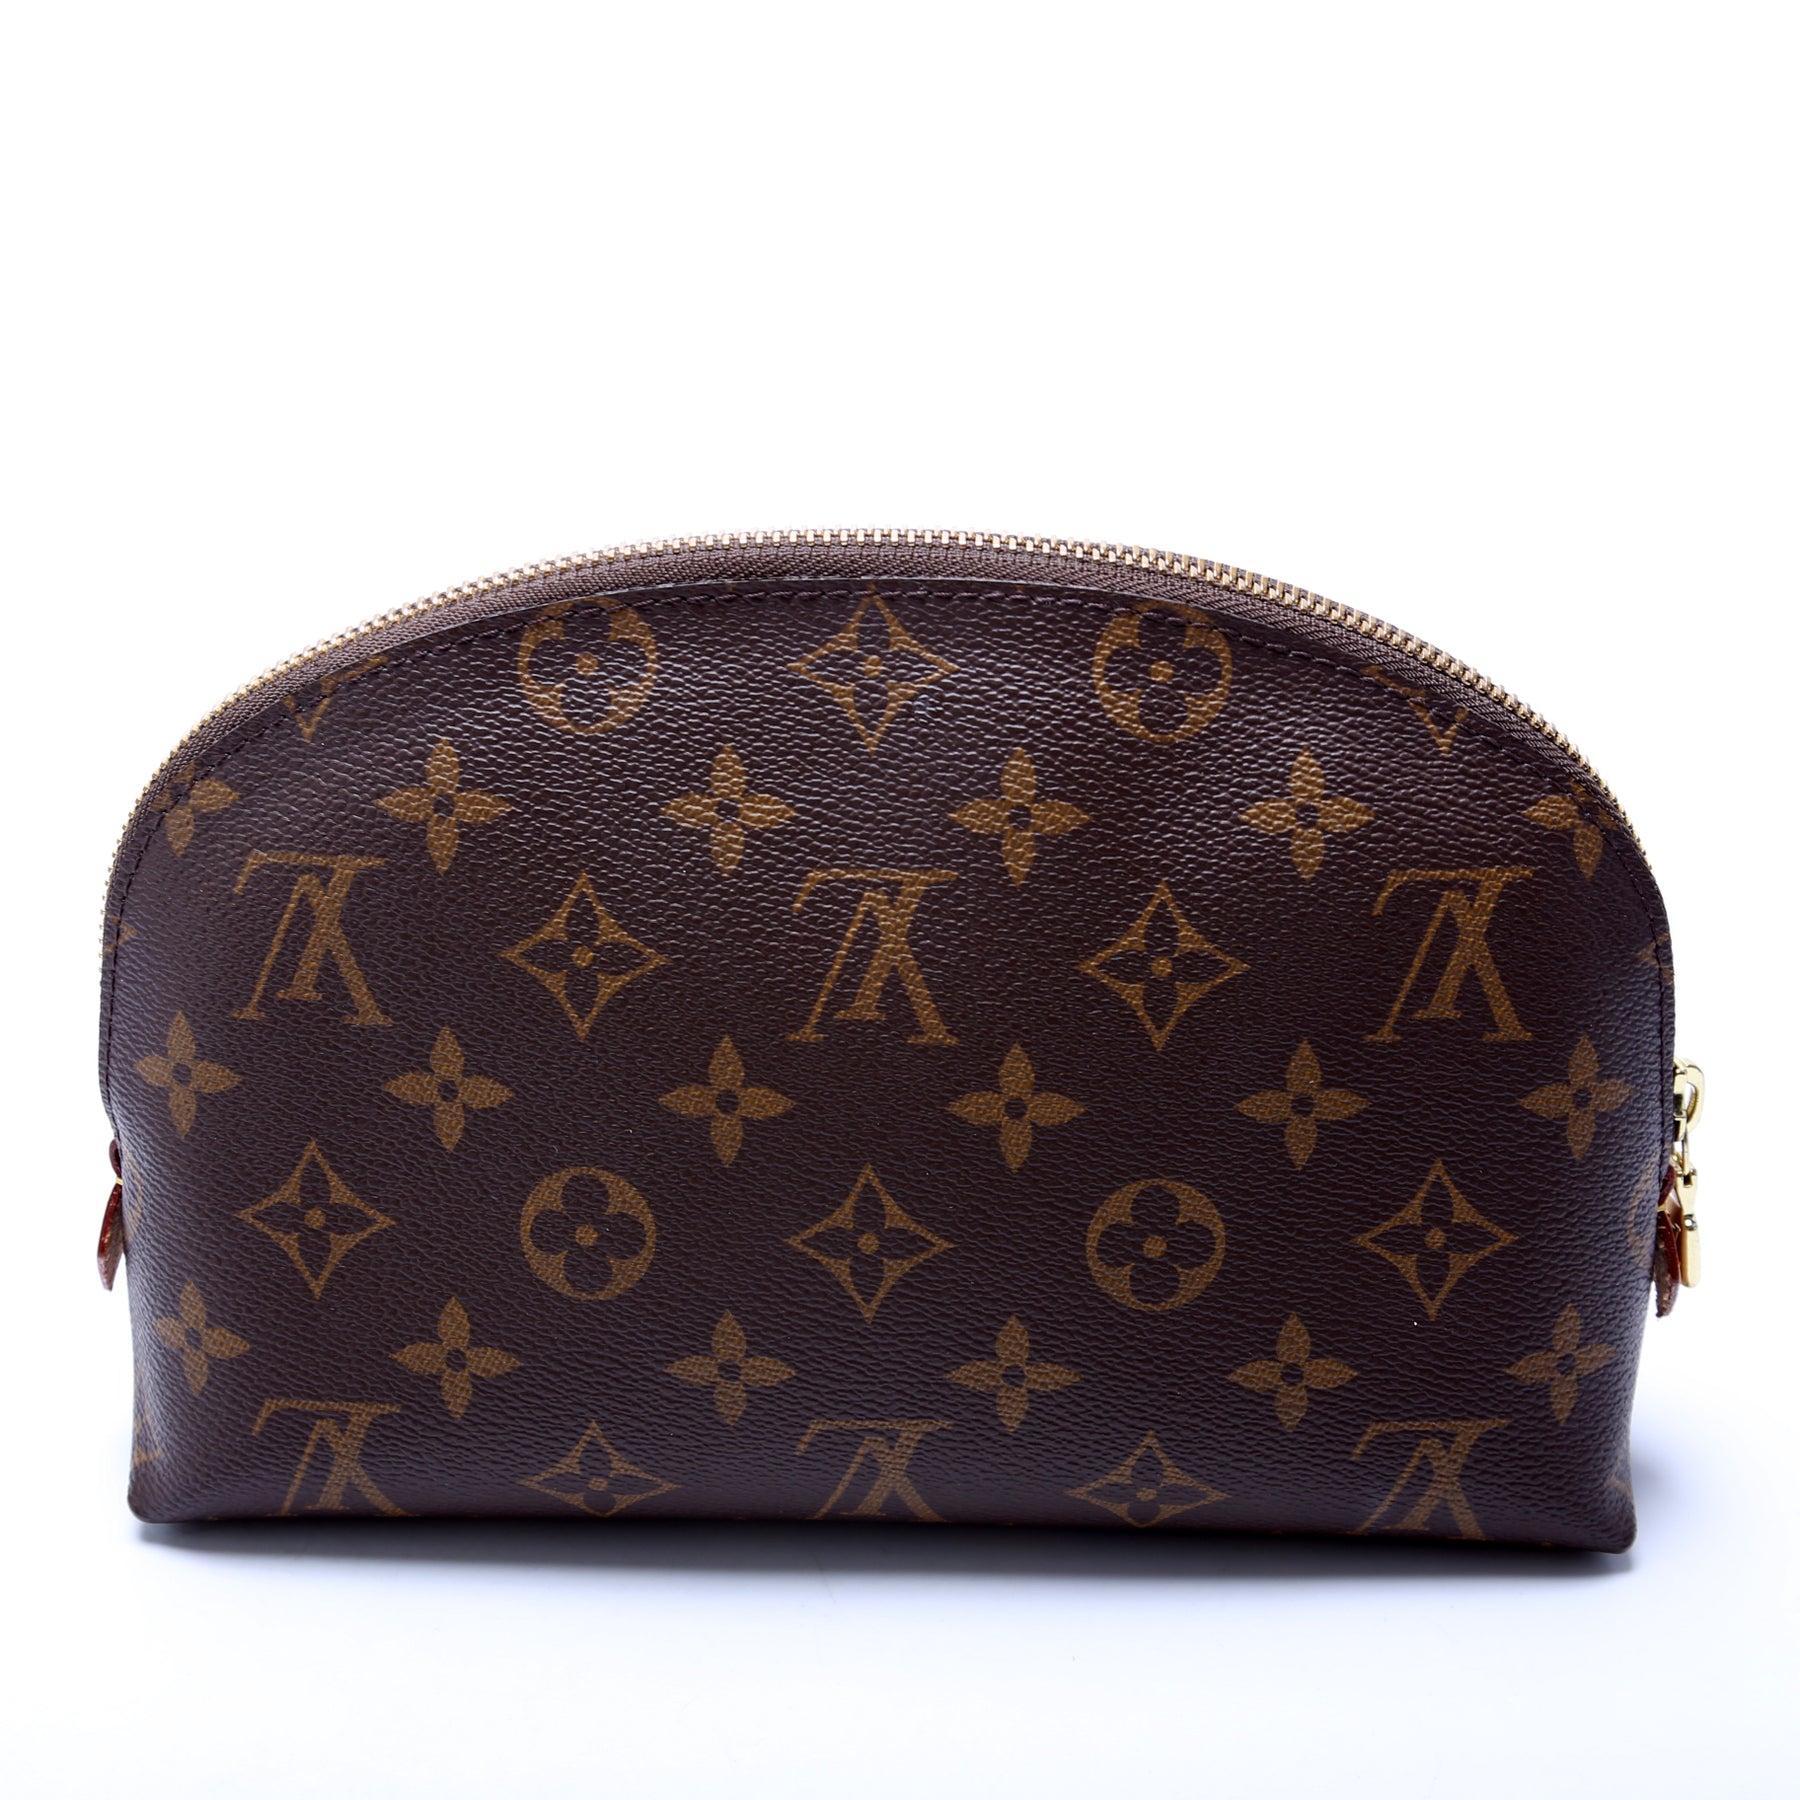 Louis Vuitton Toiletry Pouch Gm in Brown